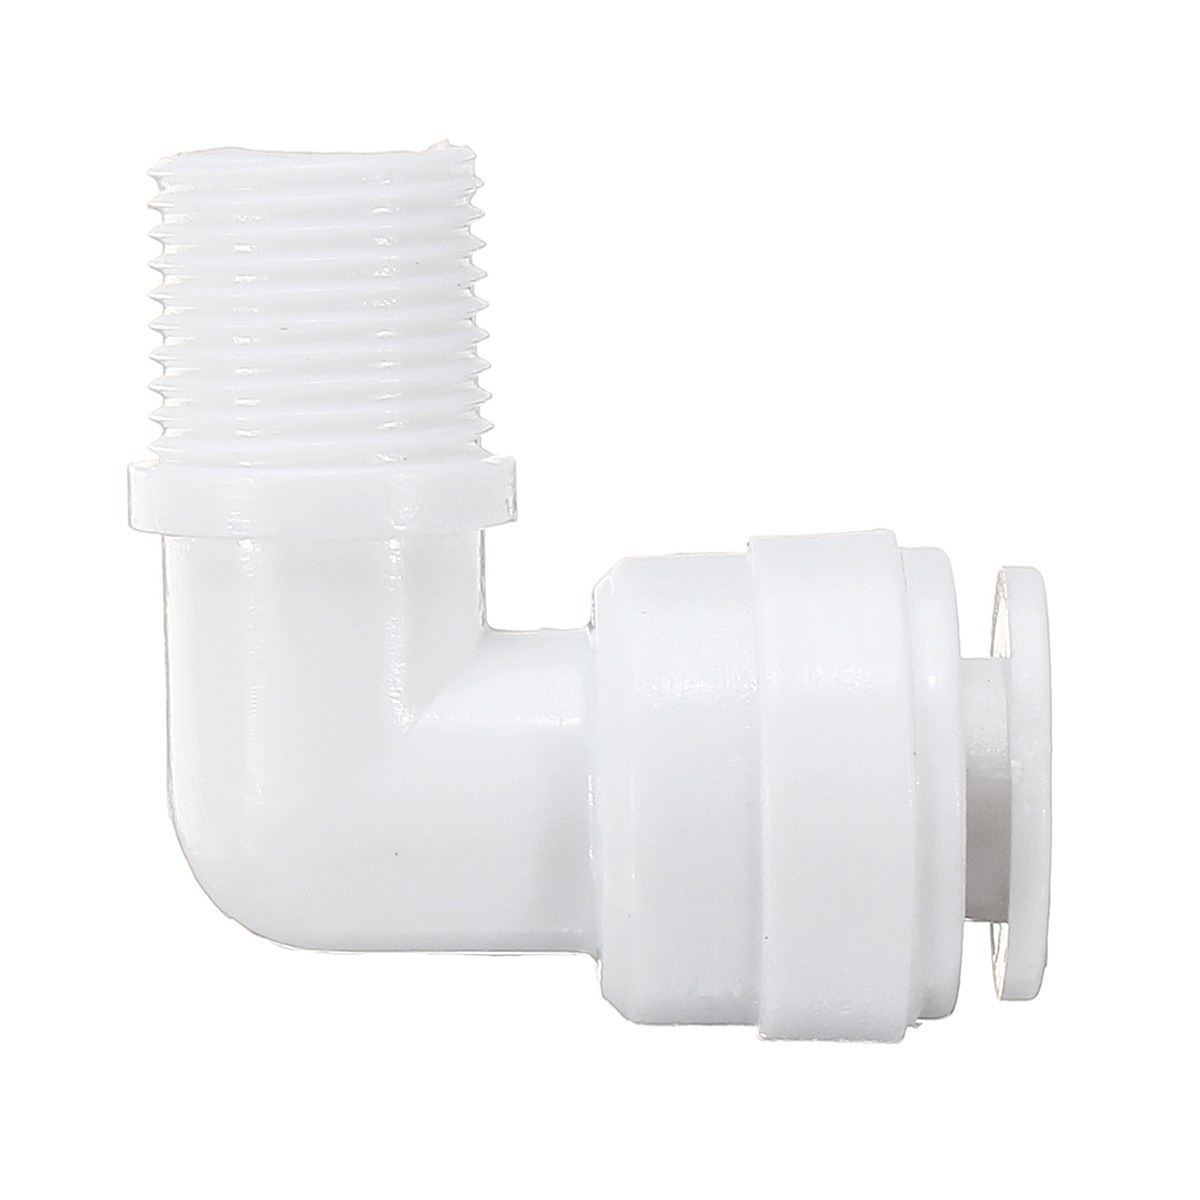 14-18-Inch-RO-Grade-Water-Tube-Fitting-Quick-Push-In-to-Connection-Pipes-Fittings-for-Water-Filter-1378008